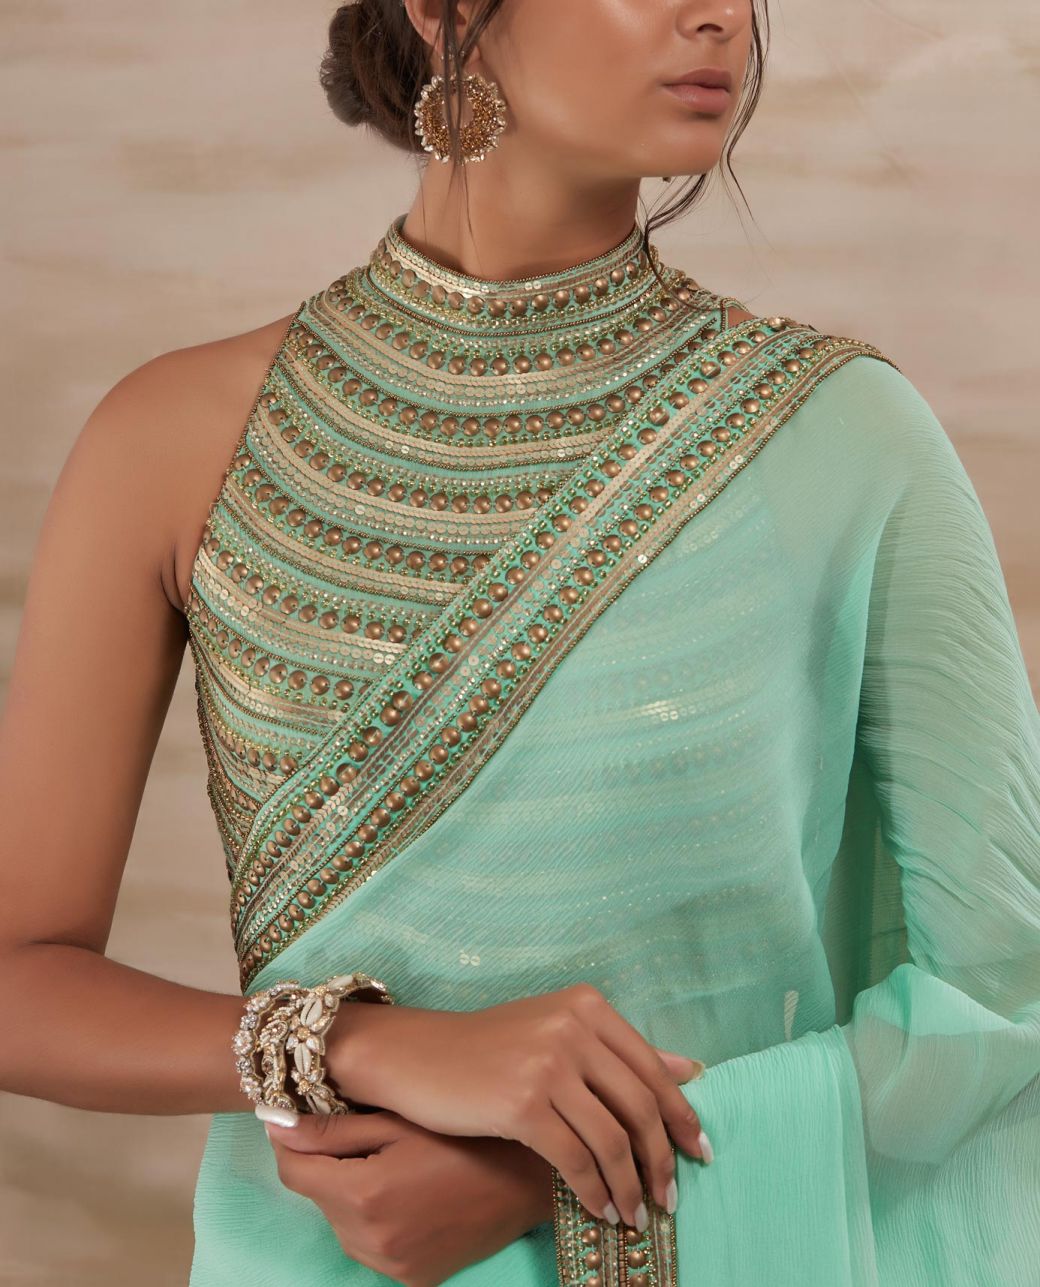 Aqua Metal Stud Saree - Indian Clothing in Denver, CO, Aurora, CO, Boulder, CO, Fort Collins, CO, Colorado Springs, CO, Parker, CO, Highlands Ranch, CO, Cherry Creek, CO, Centennial, CO, and Longmont, CO. Nationwide shipping USA - India Fashion X